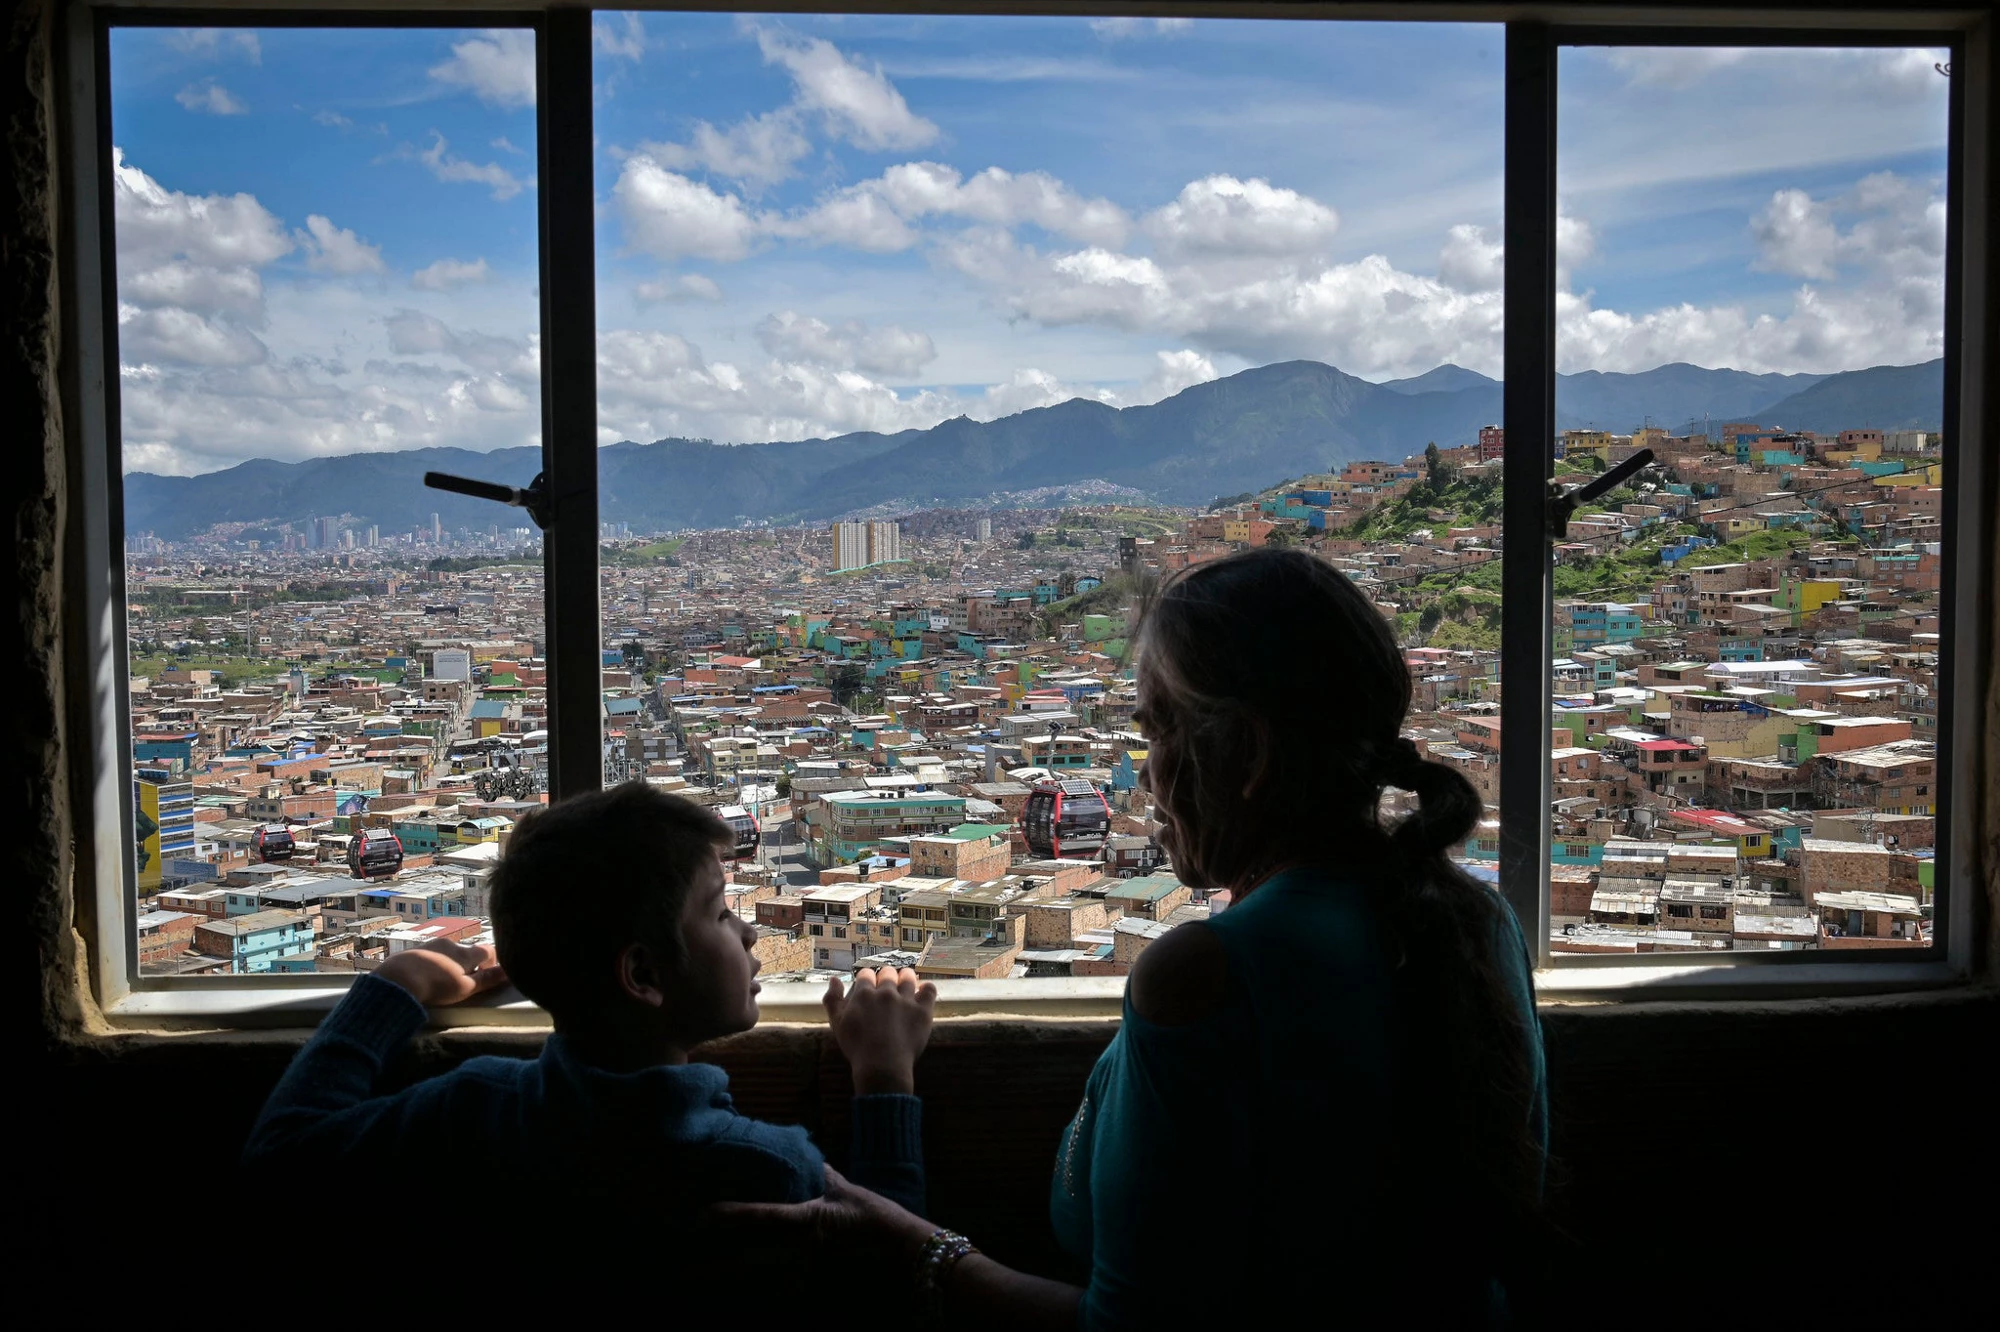 A grandmother and grandson look out the window of their home in Colombia